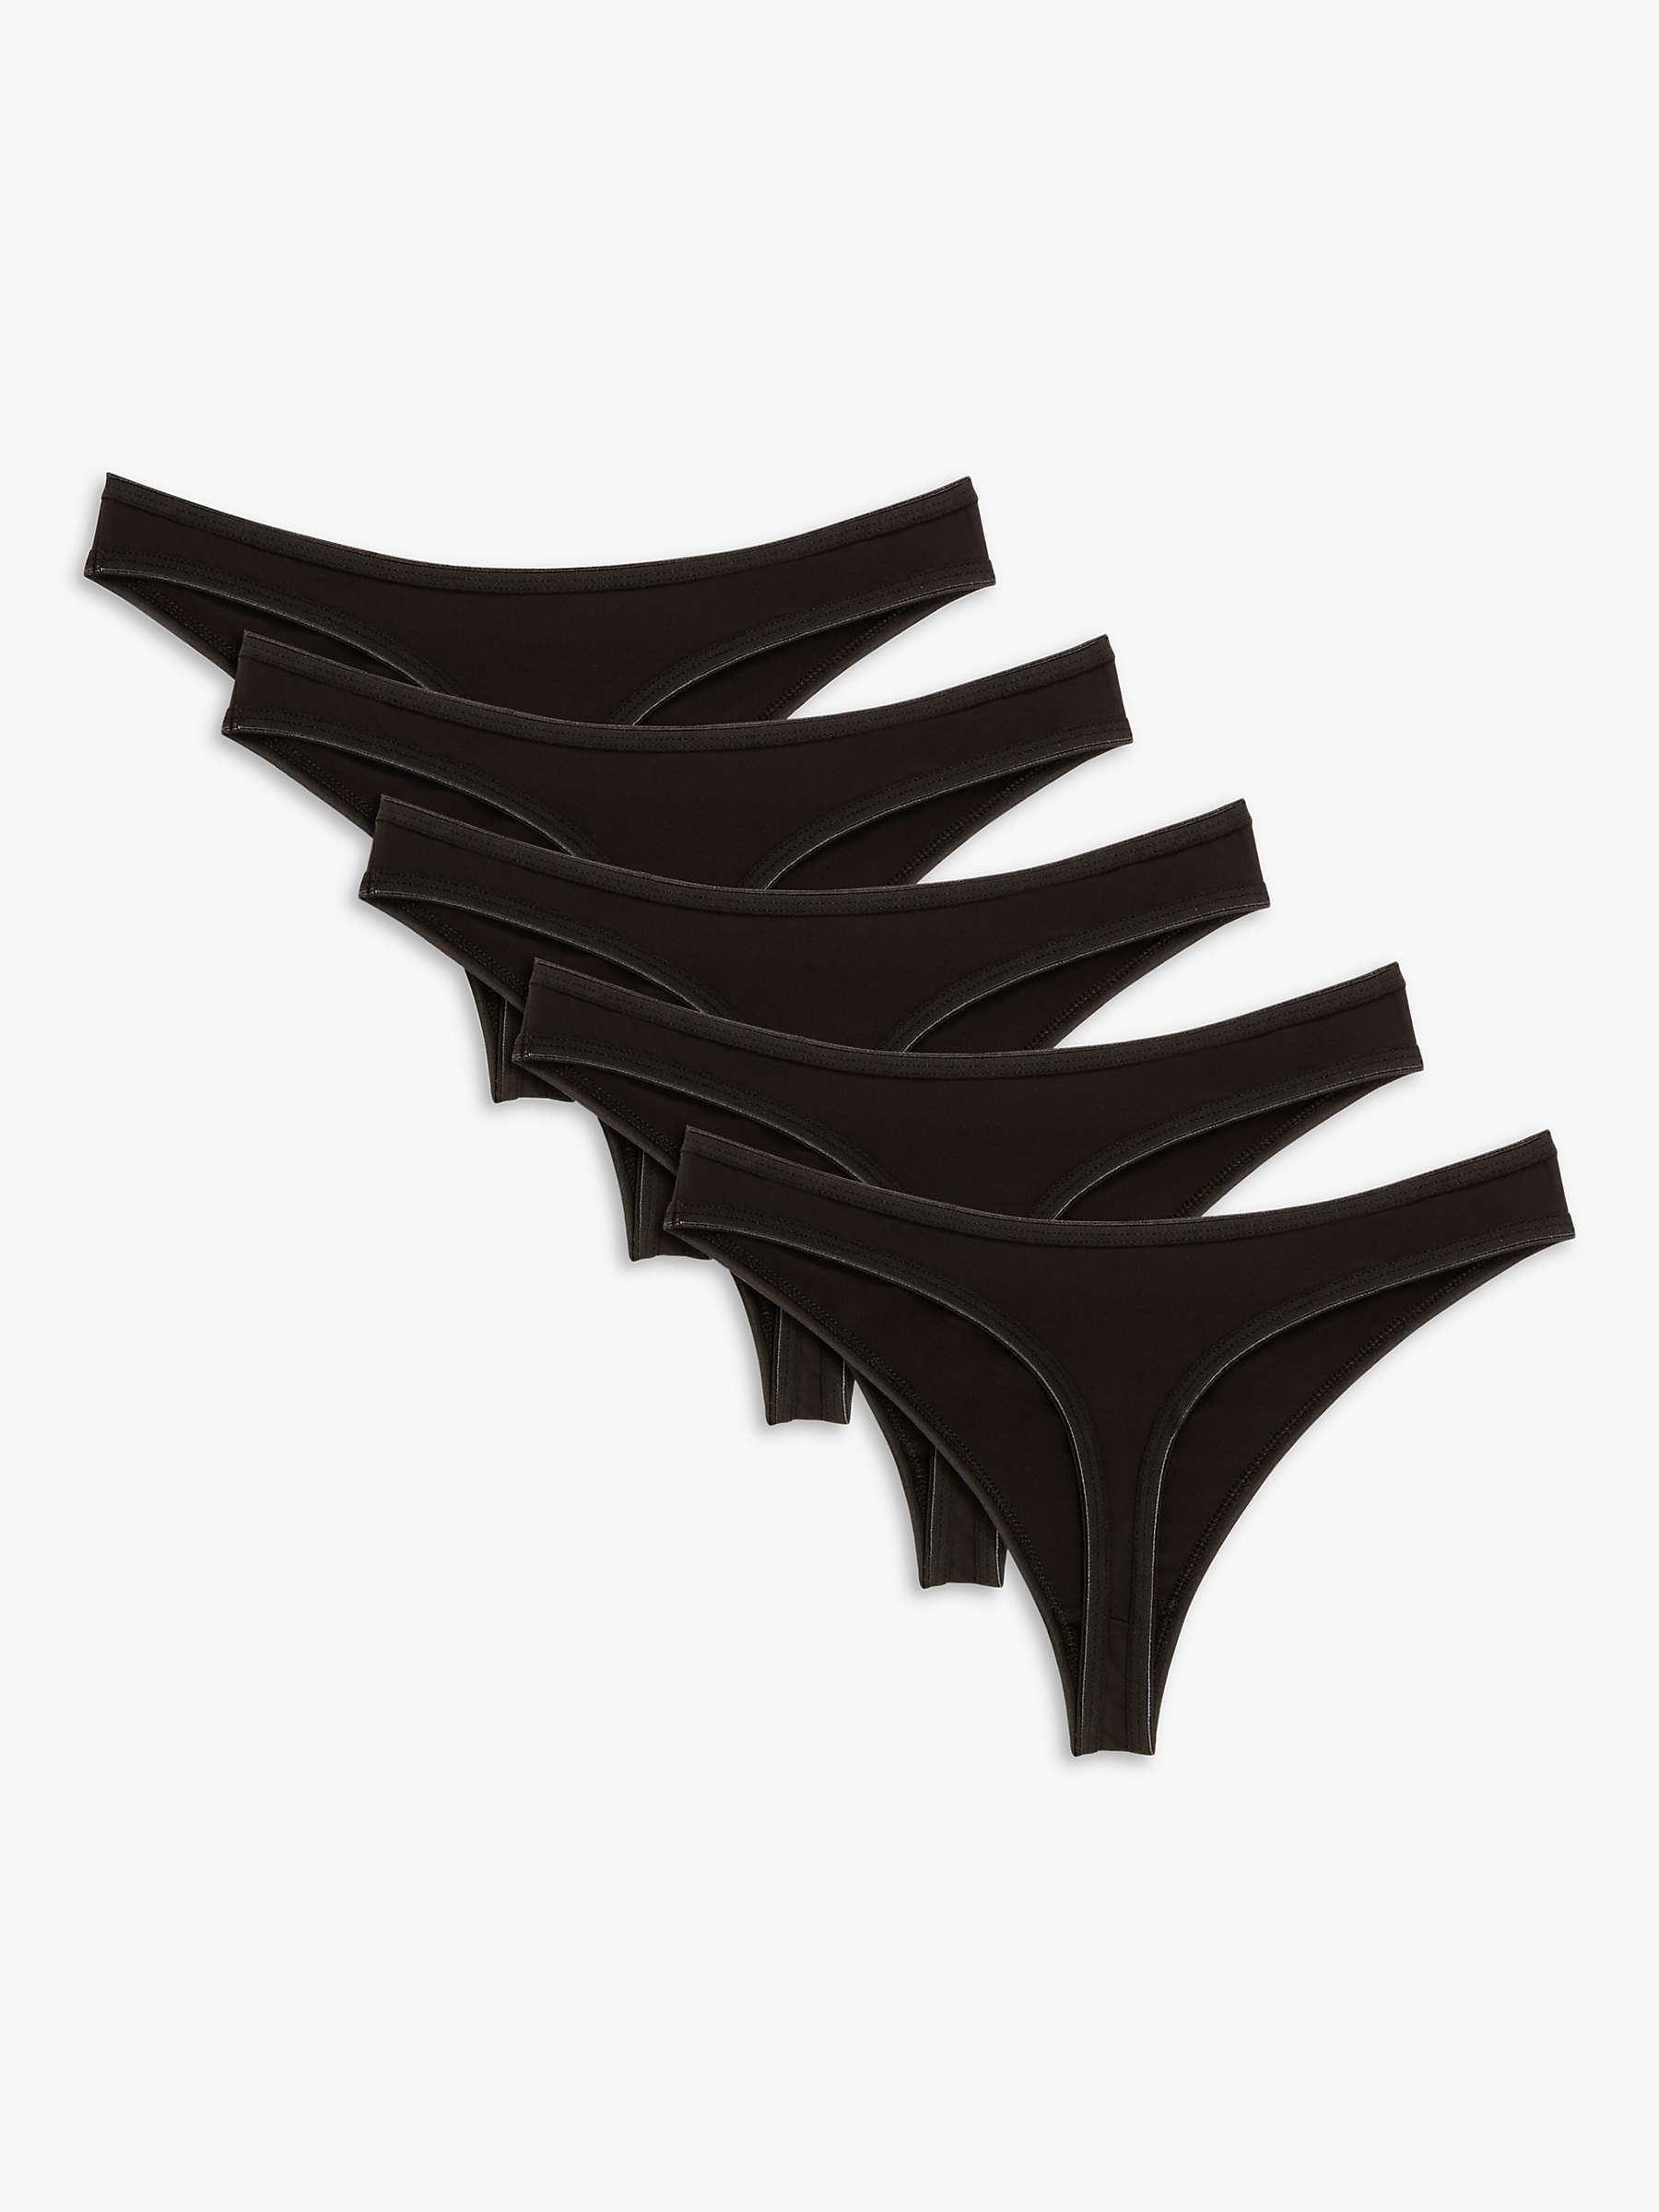 Buy John Lewis ANYDAY Microfibre Thong, Pack of 5 Online at johnlewis.com